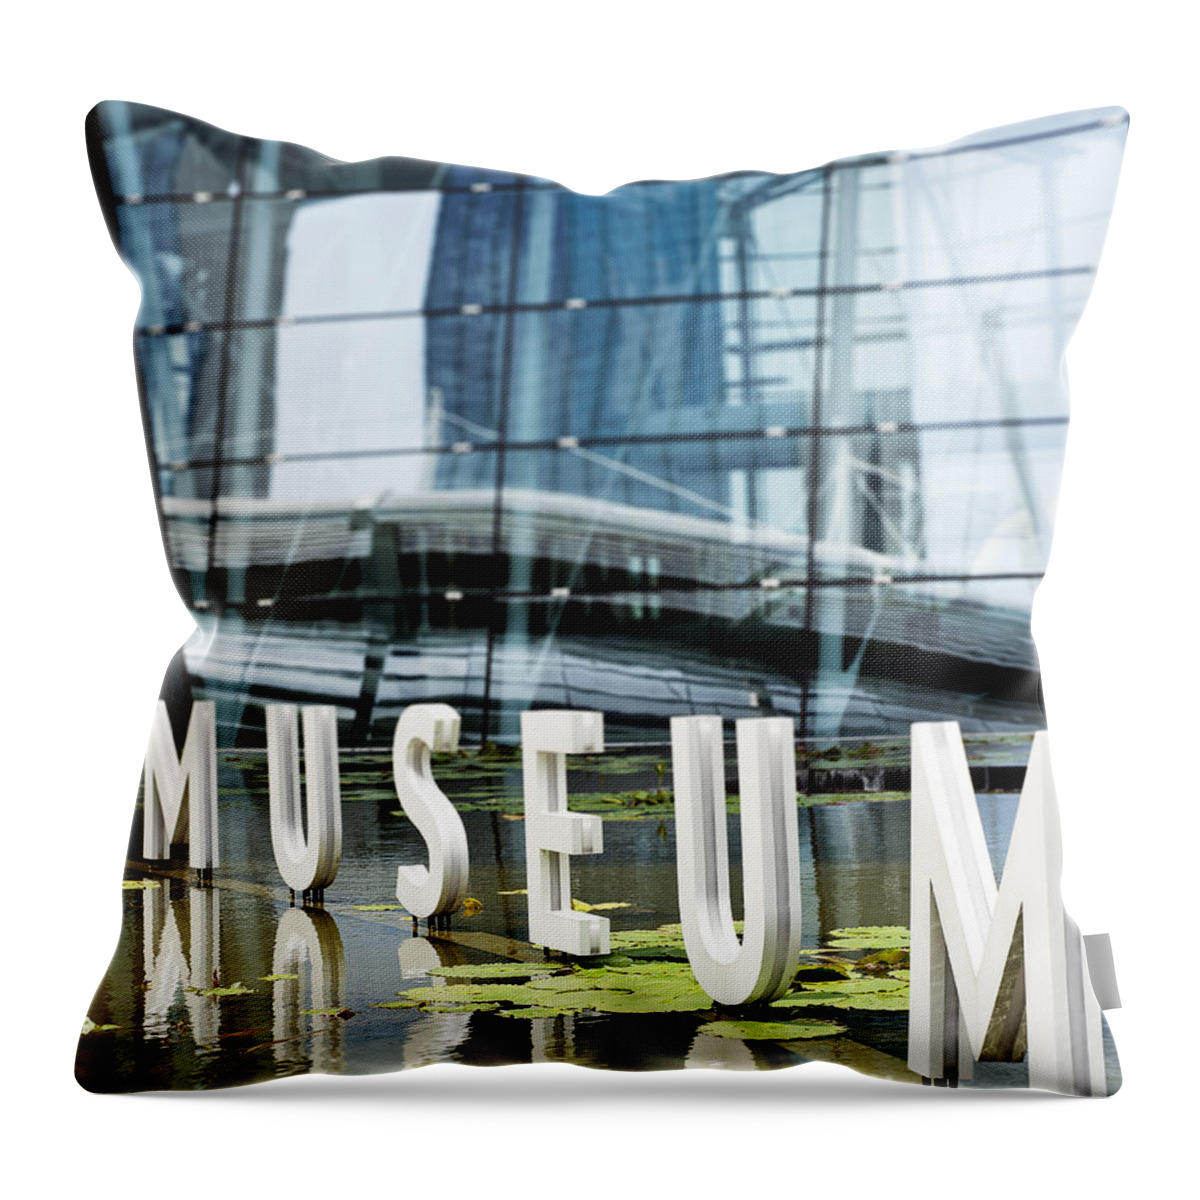 Photography Throw Pillow featuring the photograph Museum Reflection by Ivy Ho